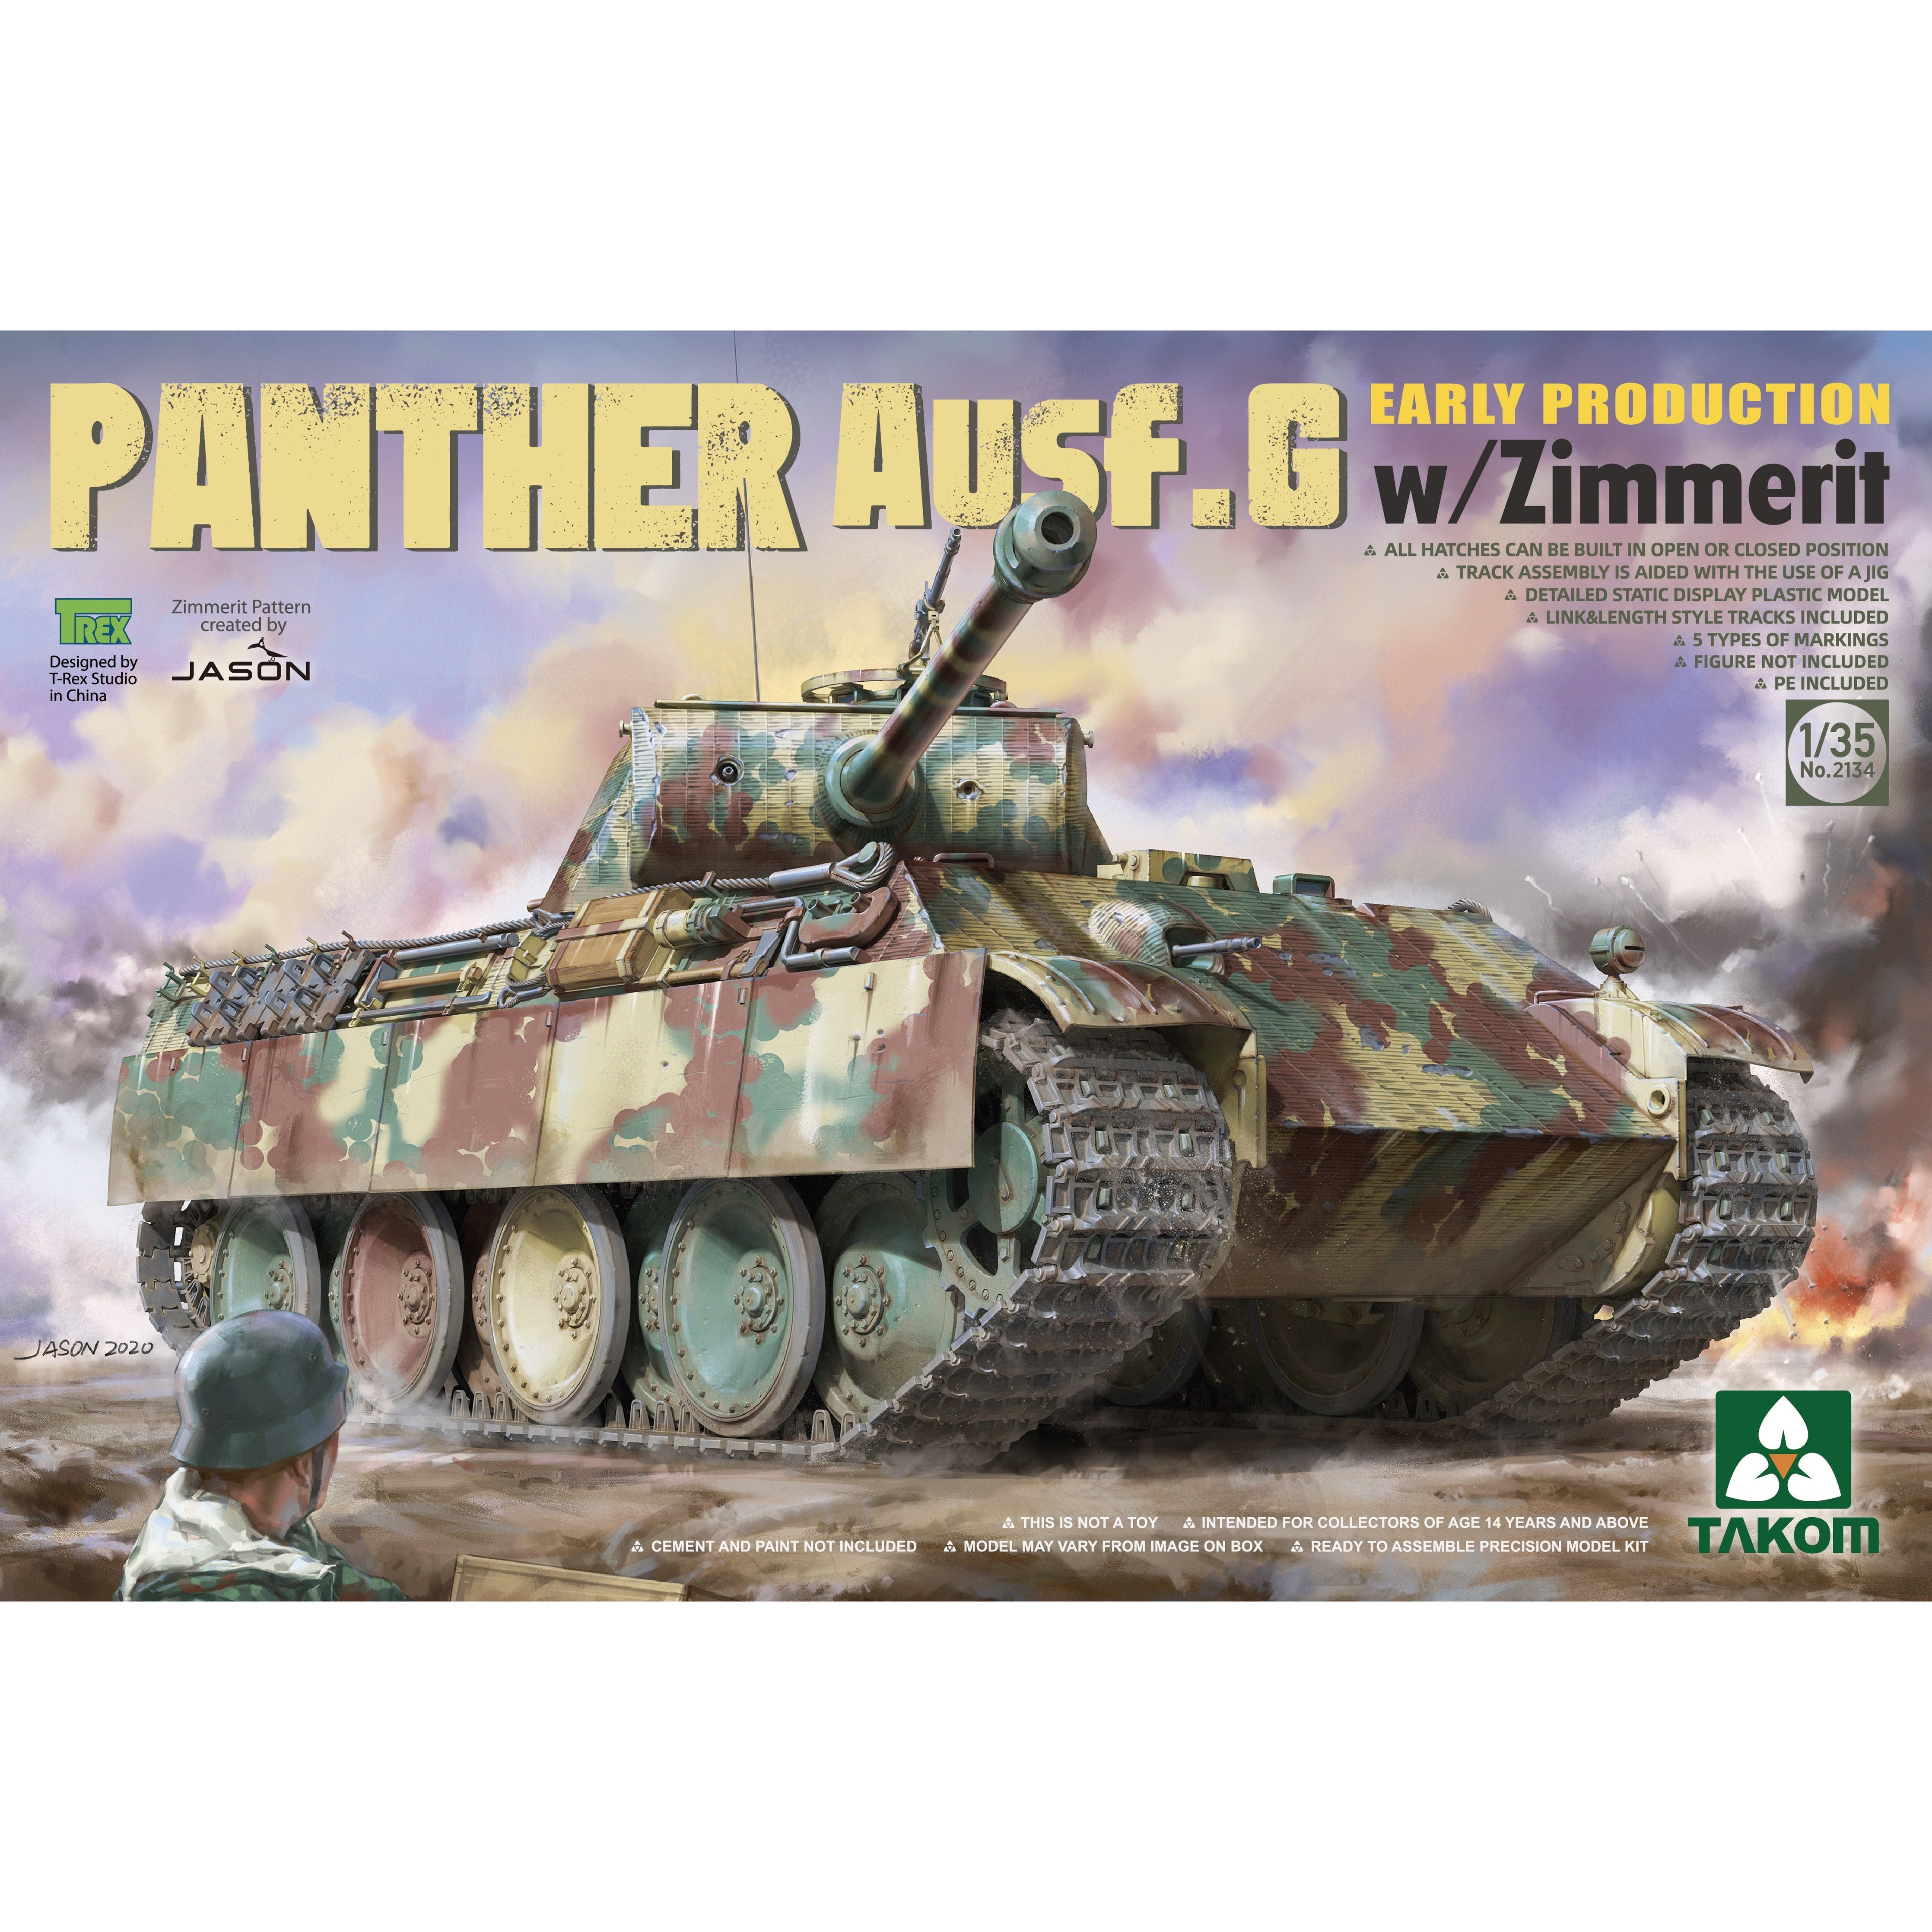 Panther Ausf. G Early Production w/Zimmerit 1/35 by Takom